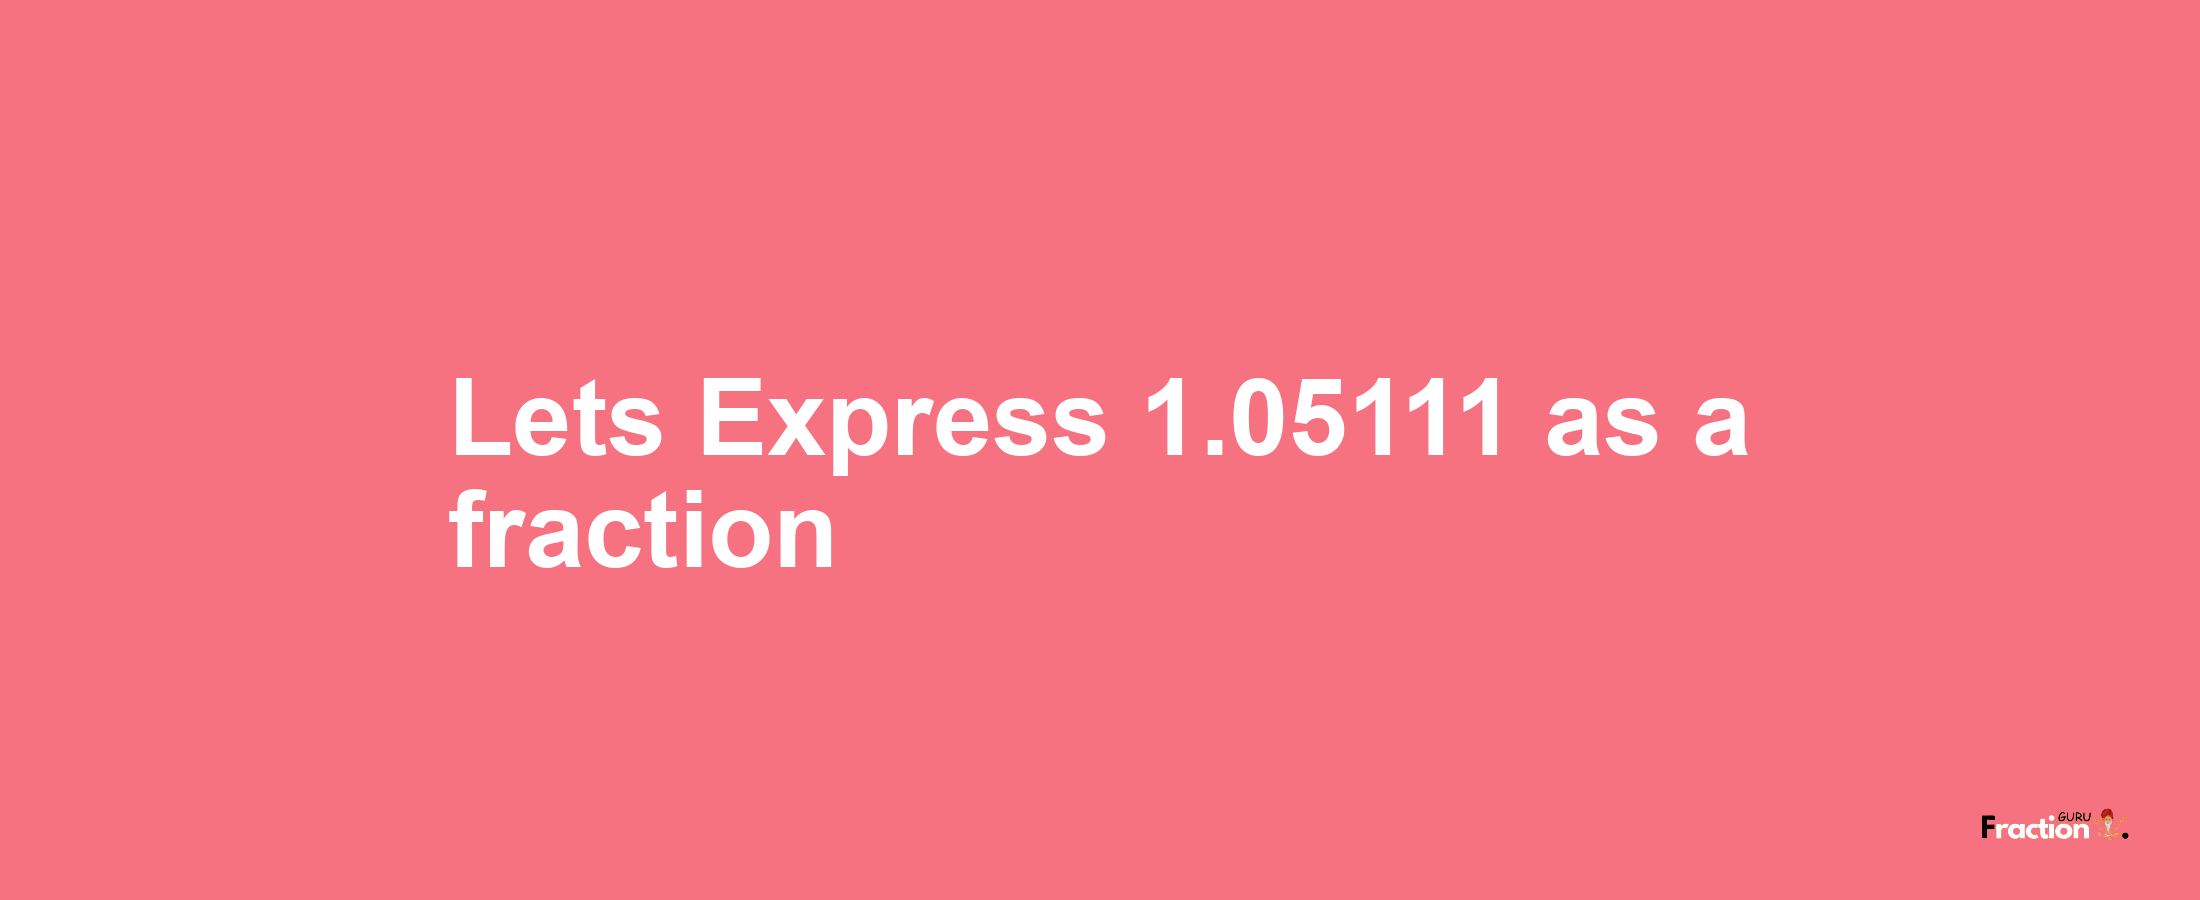 Lets Express 1.05111 as afraction